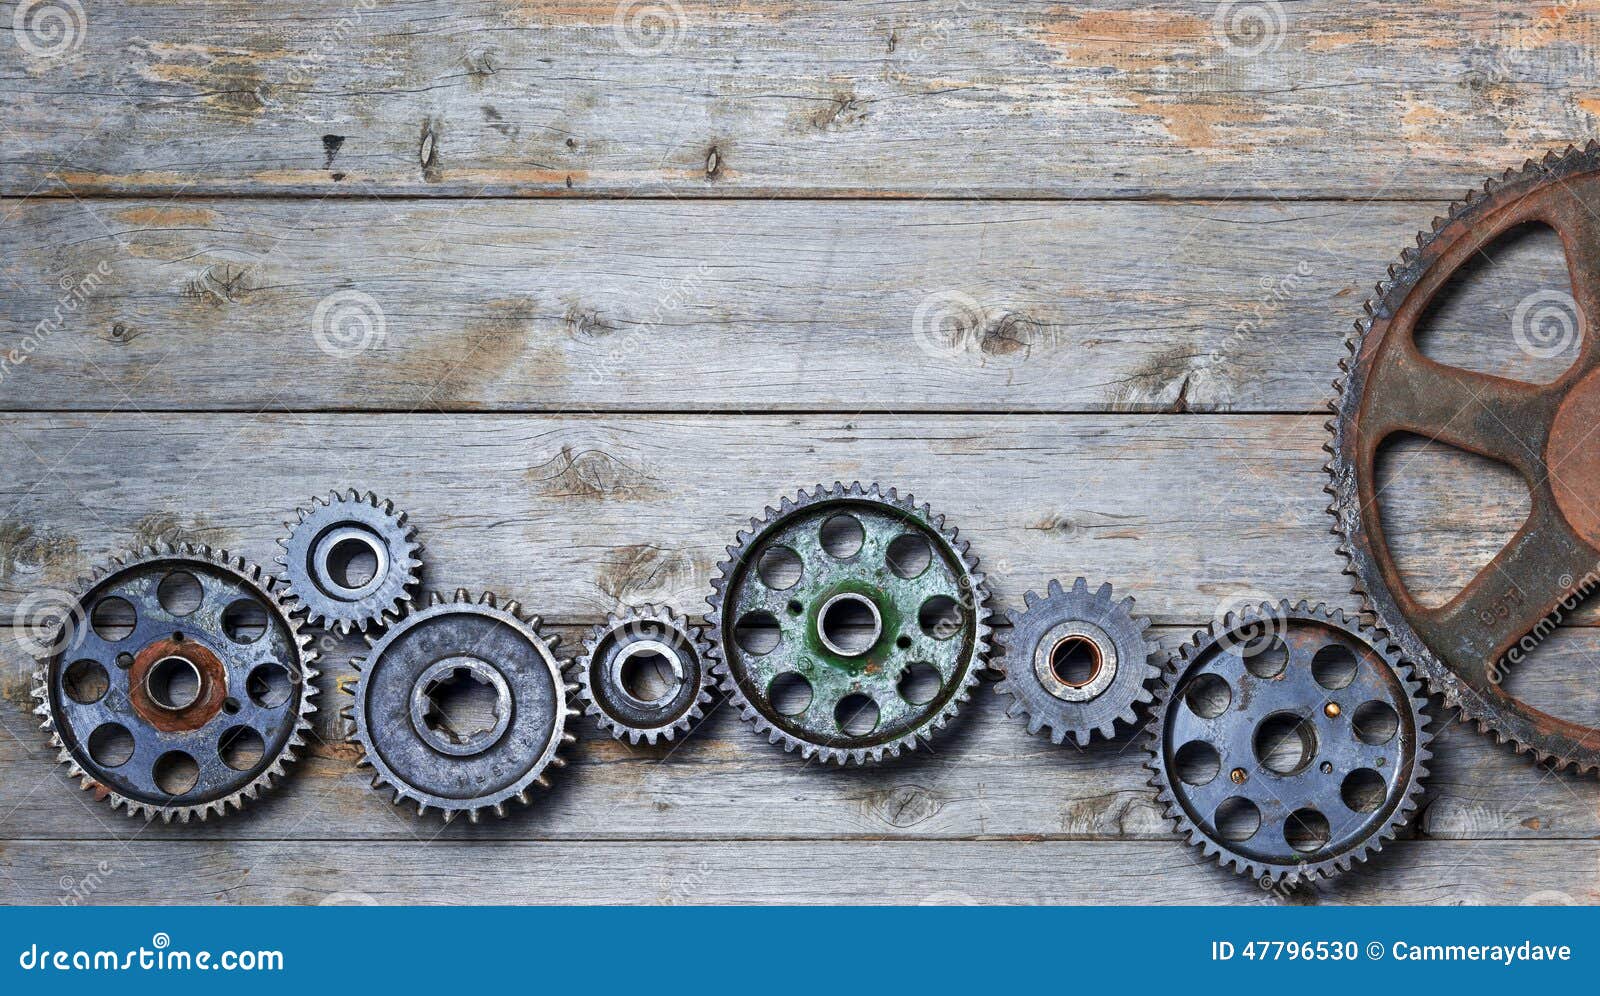 wood cogs technology industry business background